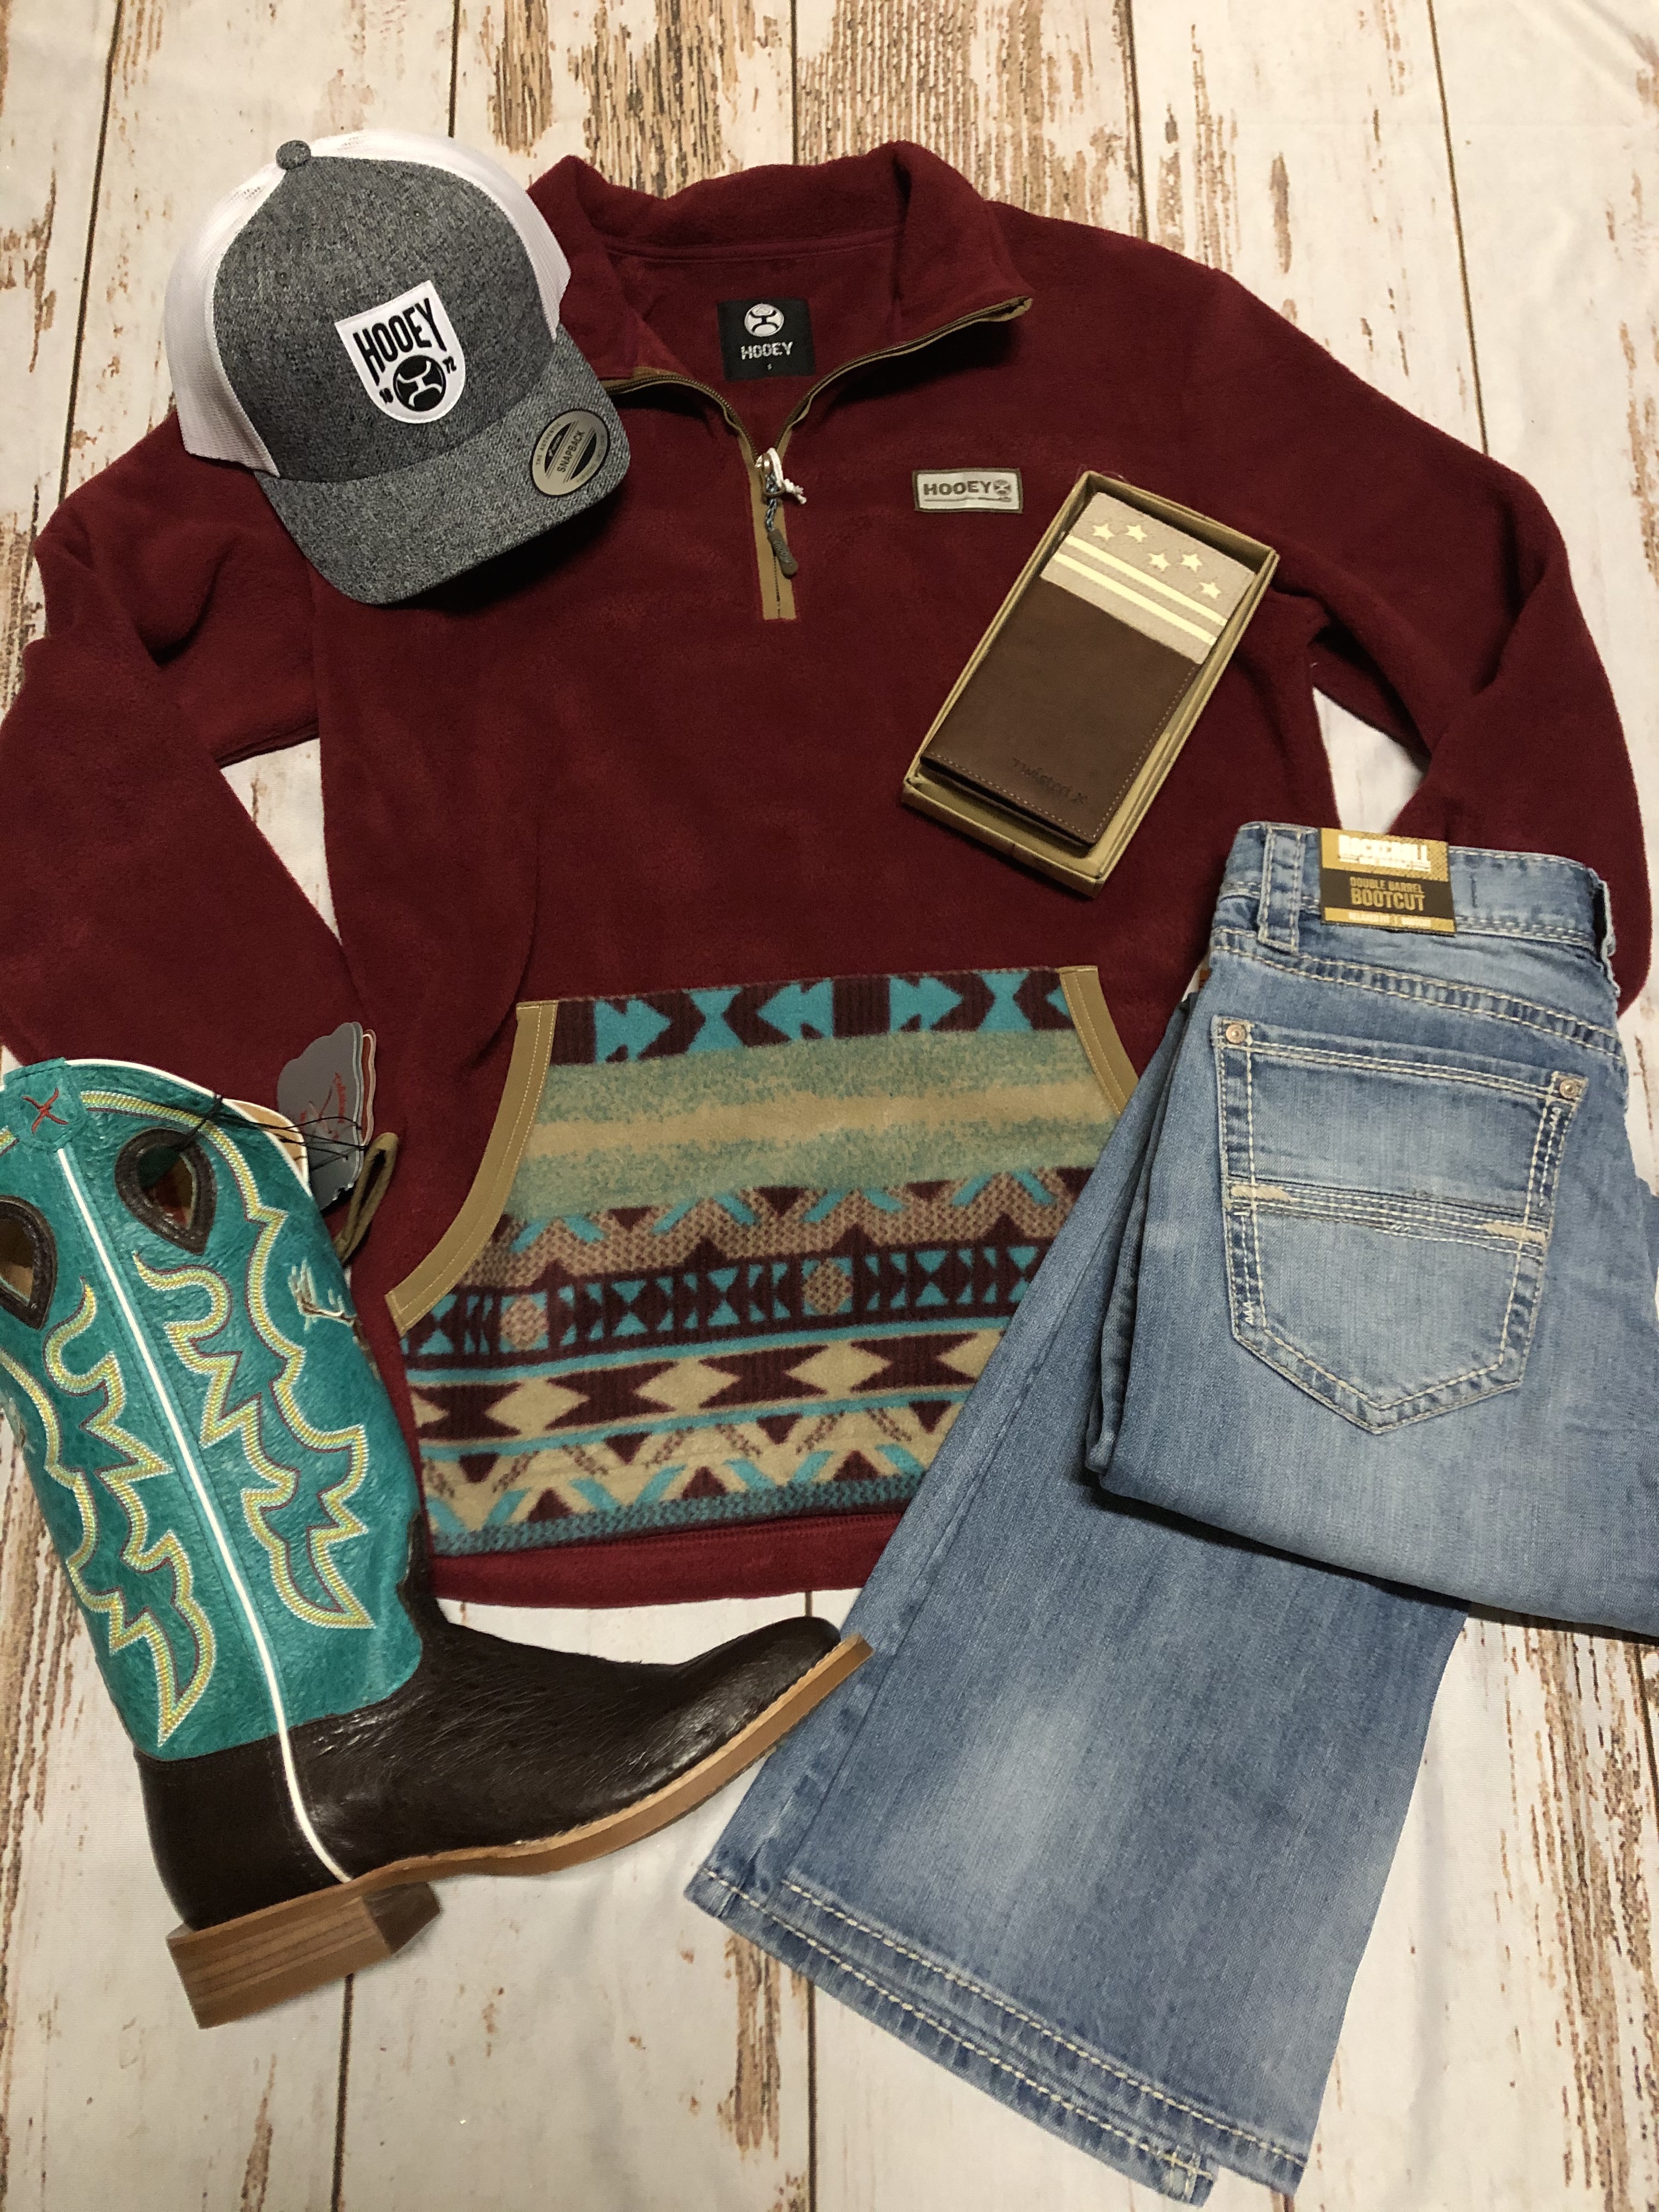 Men's Winter Style Outfit of the Day - Stockyard Style